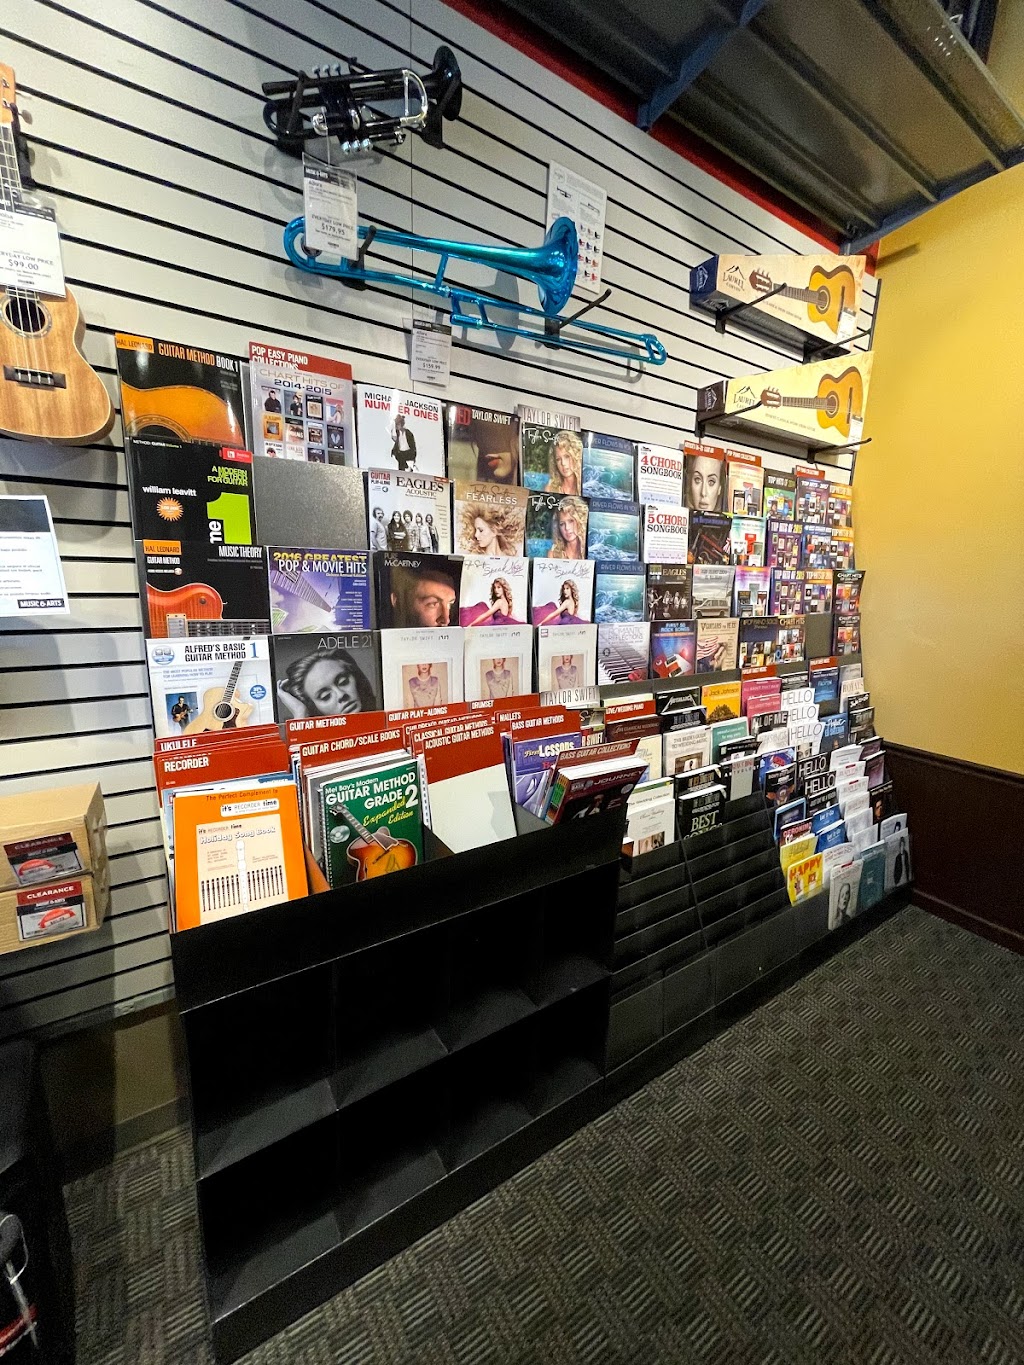 Music & Arts | 7421 W Bowles Ave Suite 12, Littleton, CO 80123, USA | Phone: (303) 973-0977